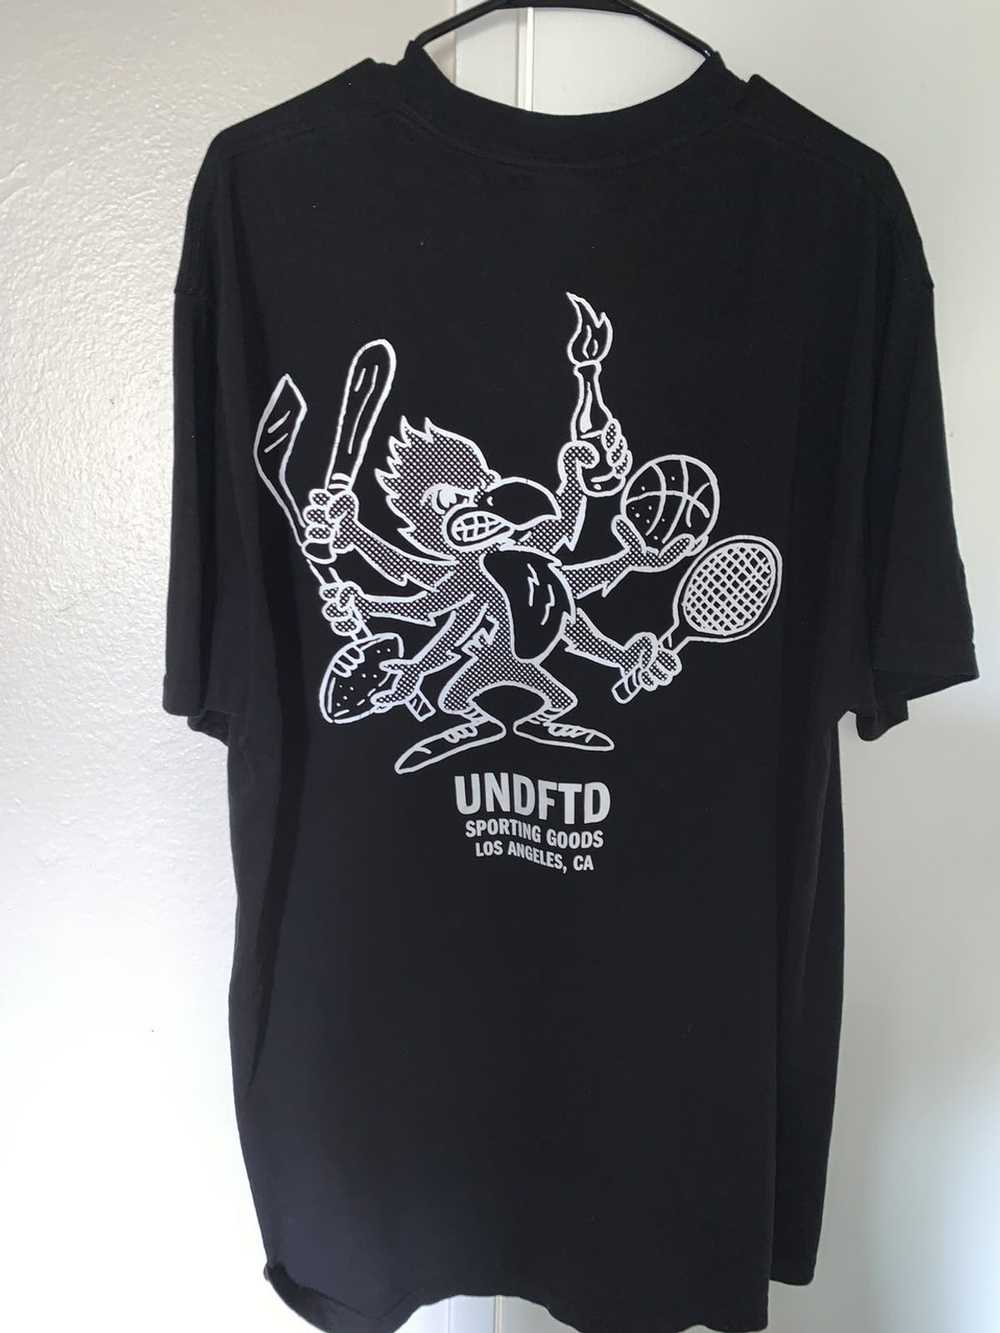 Undefeated Undefeated Sporting Goods T-Shirt - image 4